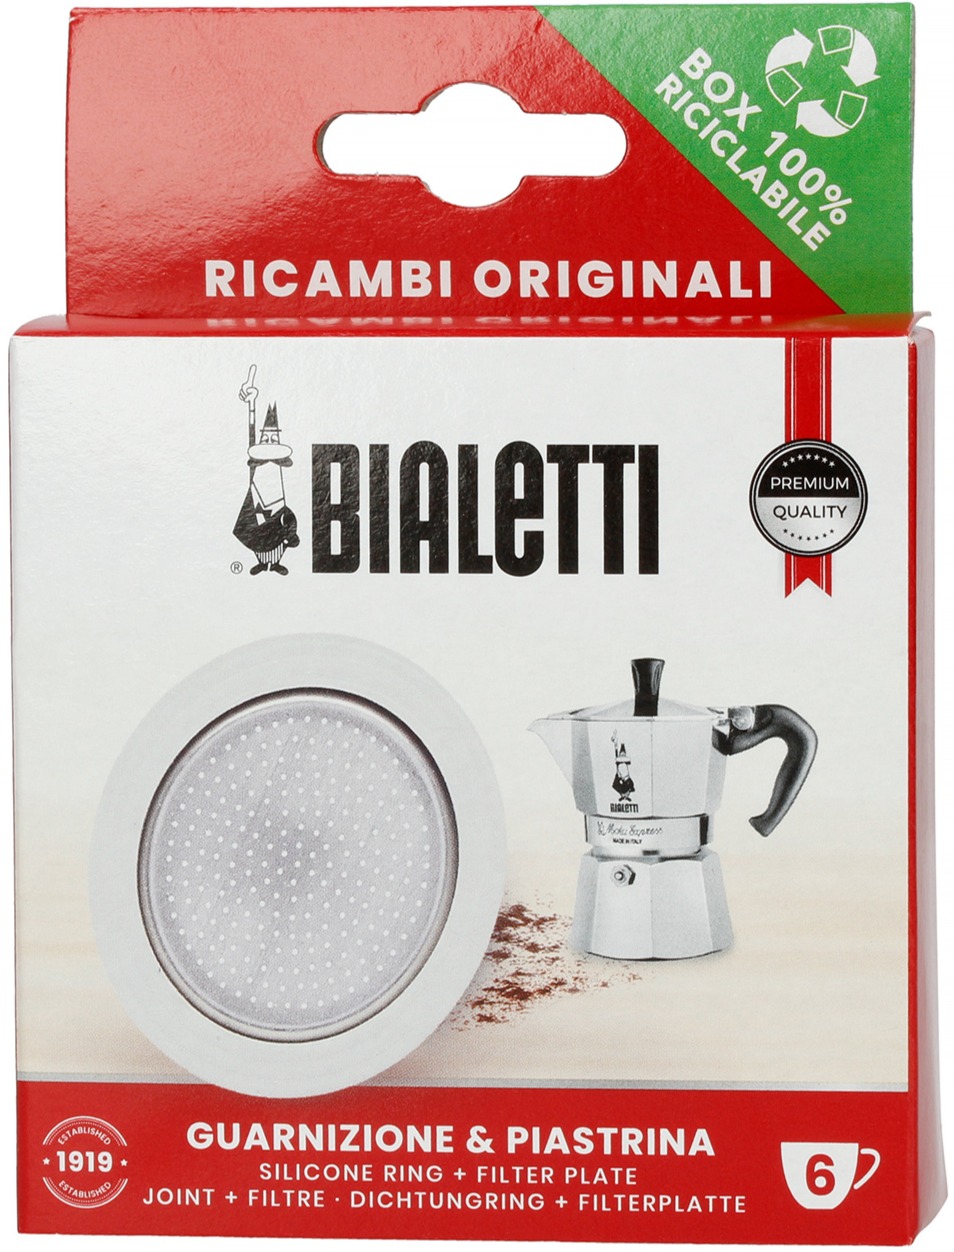 Bialetti Spare Gasket And Filter Plate For Moka Express And Induction